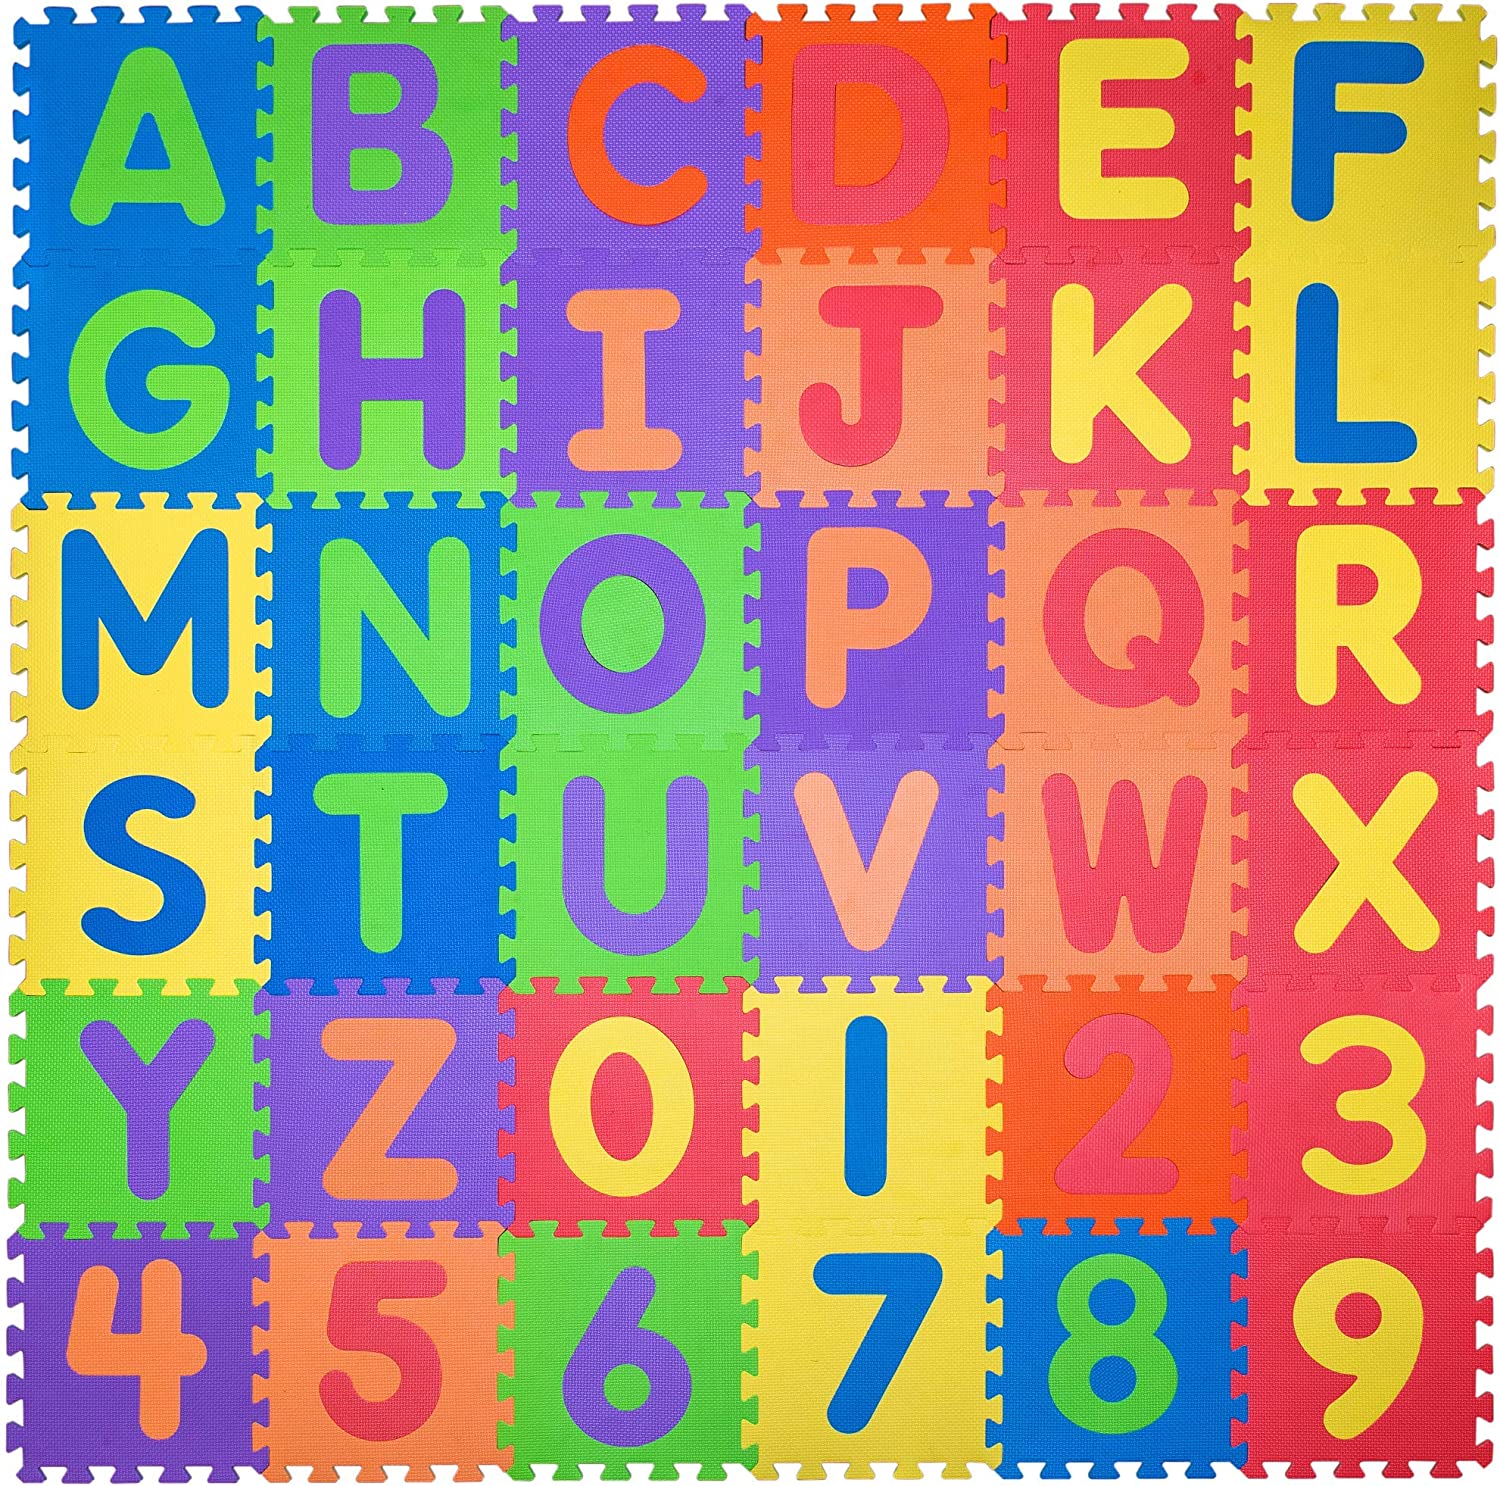 36 Tiles 4.7in Alphabet Play Mat For Kids Toddlers - Interlocking Foam Puzzles ABC & Numbers 0 To 9 Flooring Mat For Play & Exercise For Crawling Baby, Infant, Classroom, Toddlers, Kids, Gym Workout - image 1 of 10